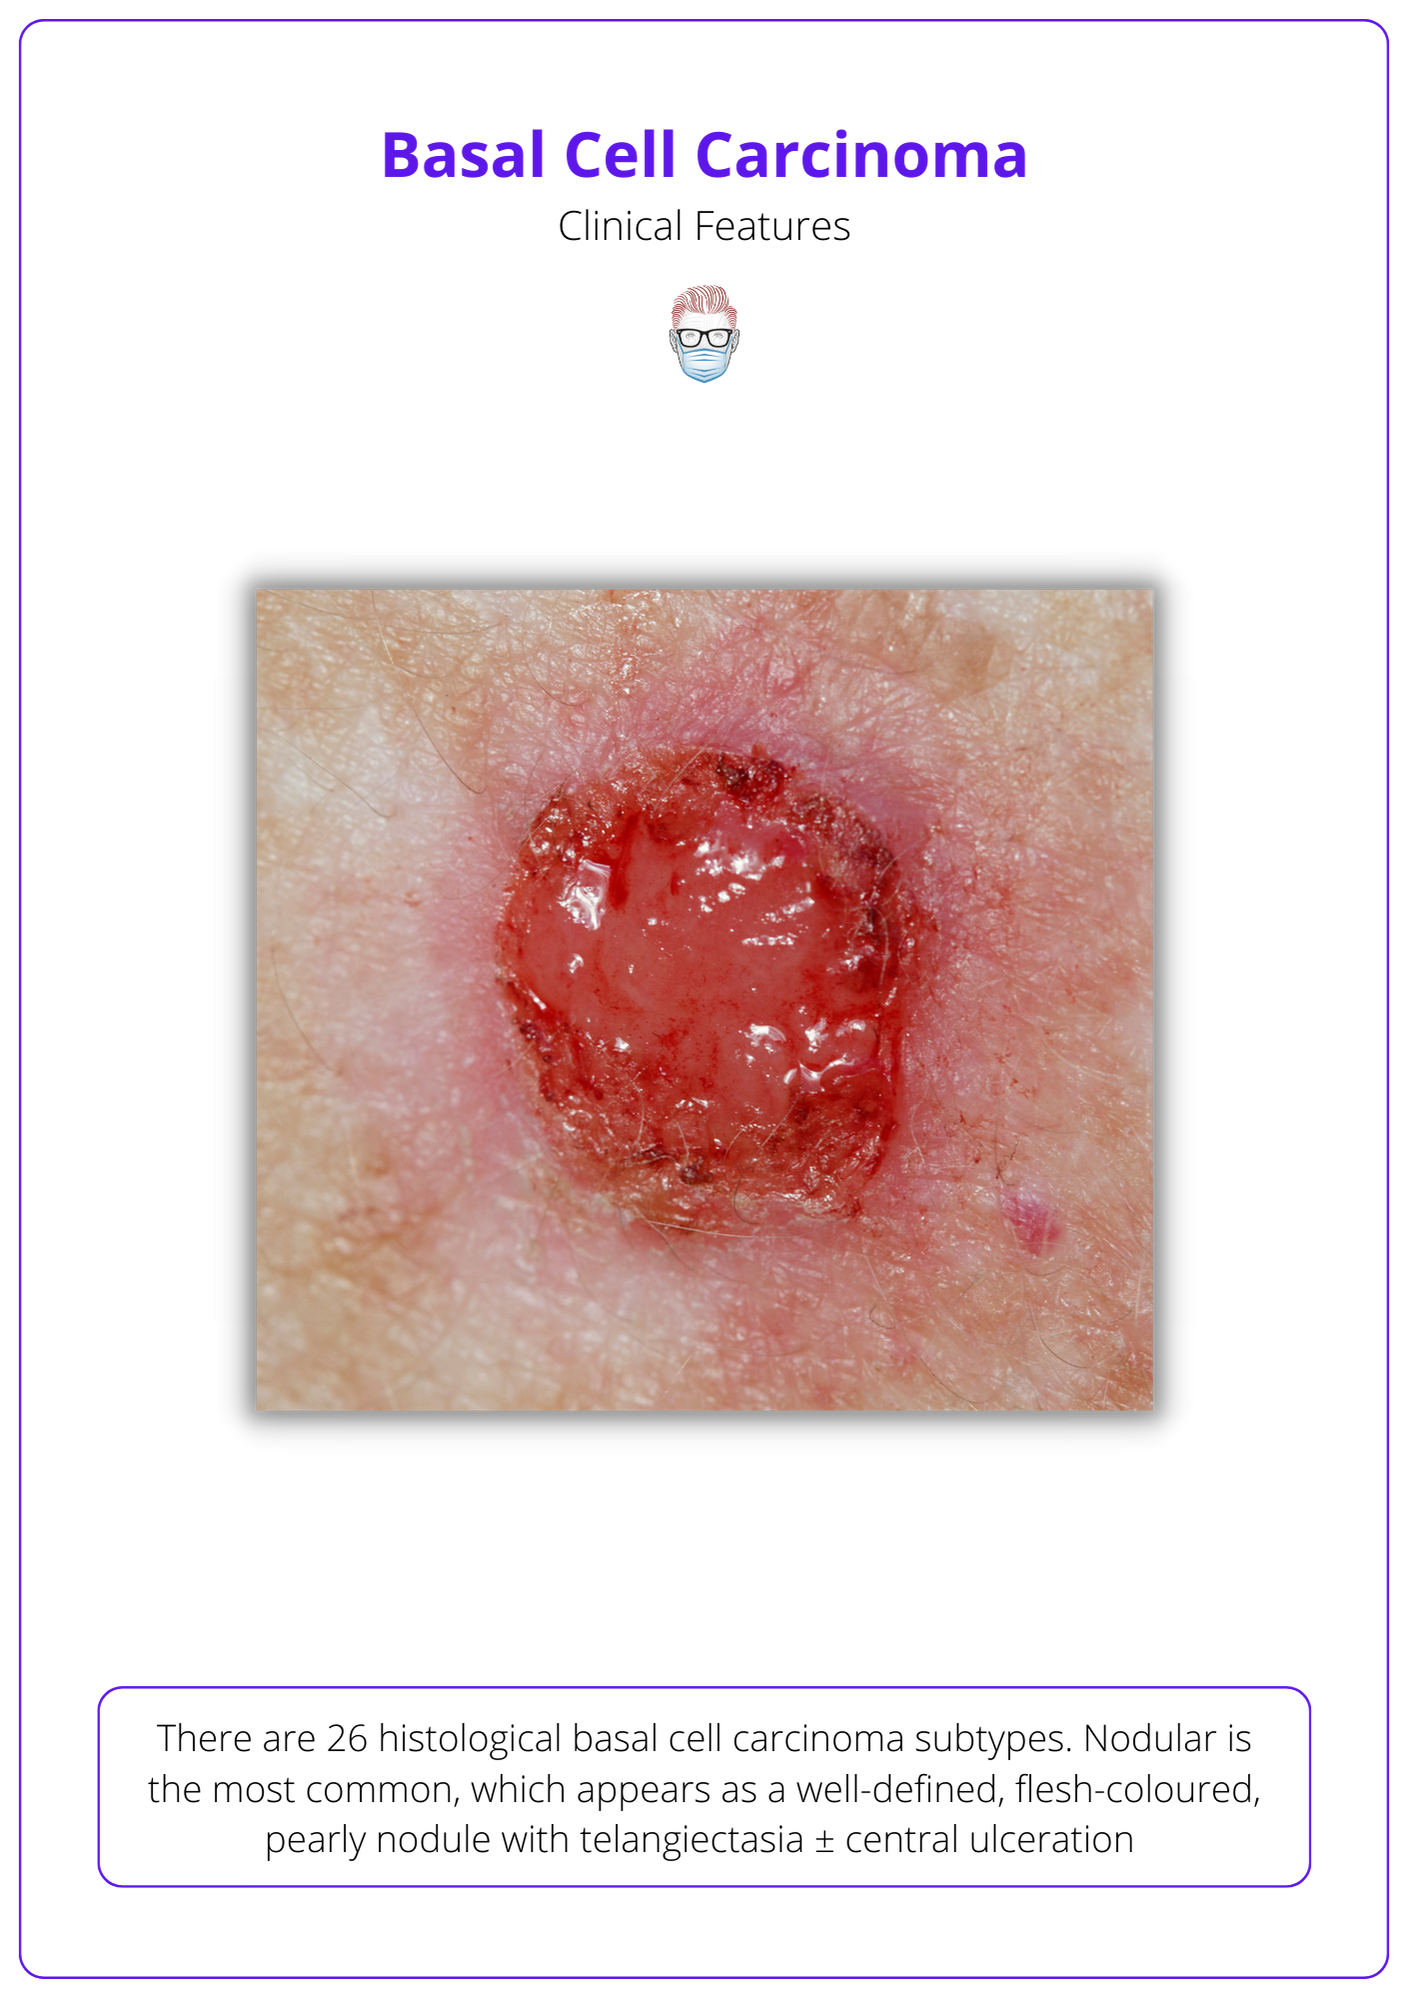 infiltrative basal cell carcinoma